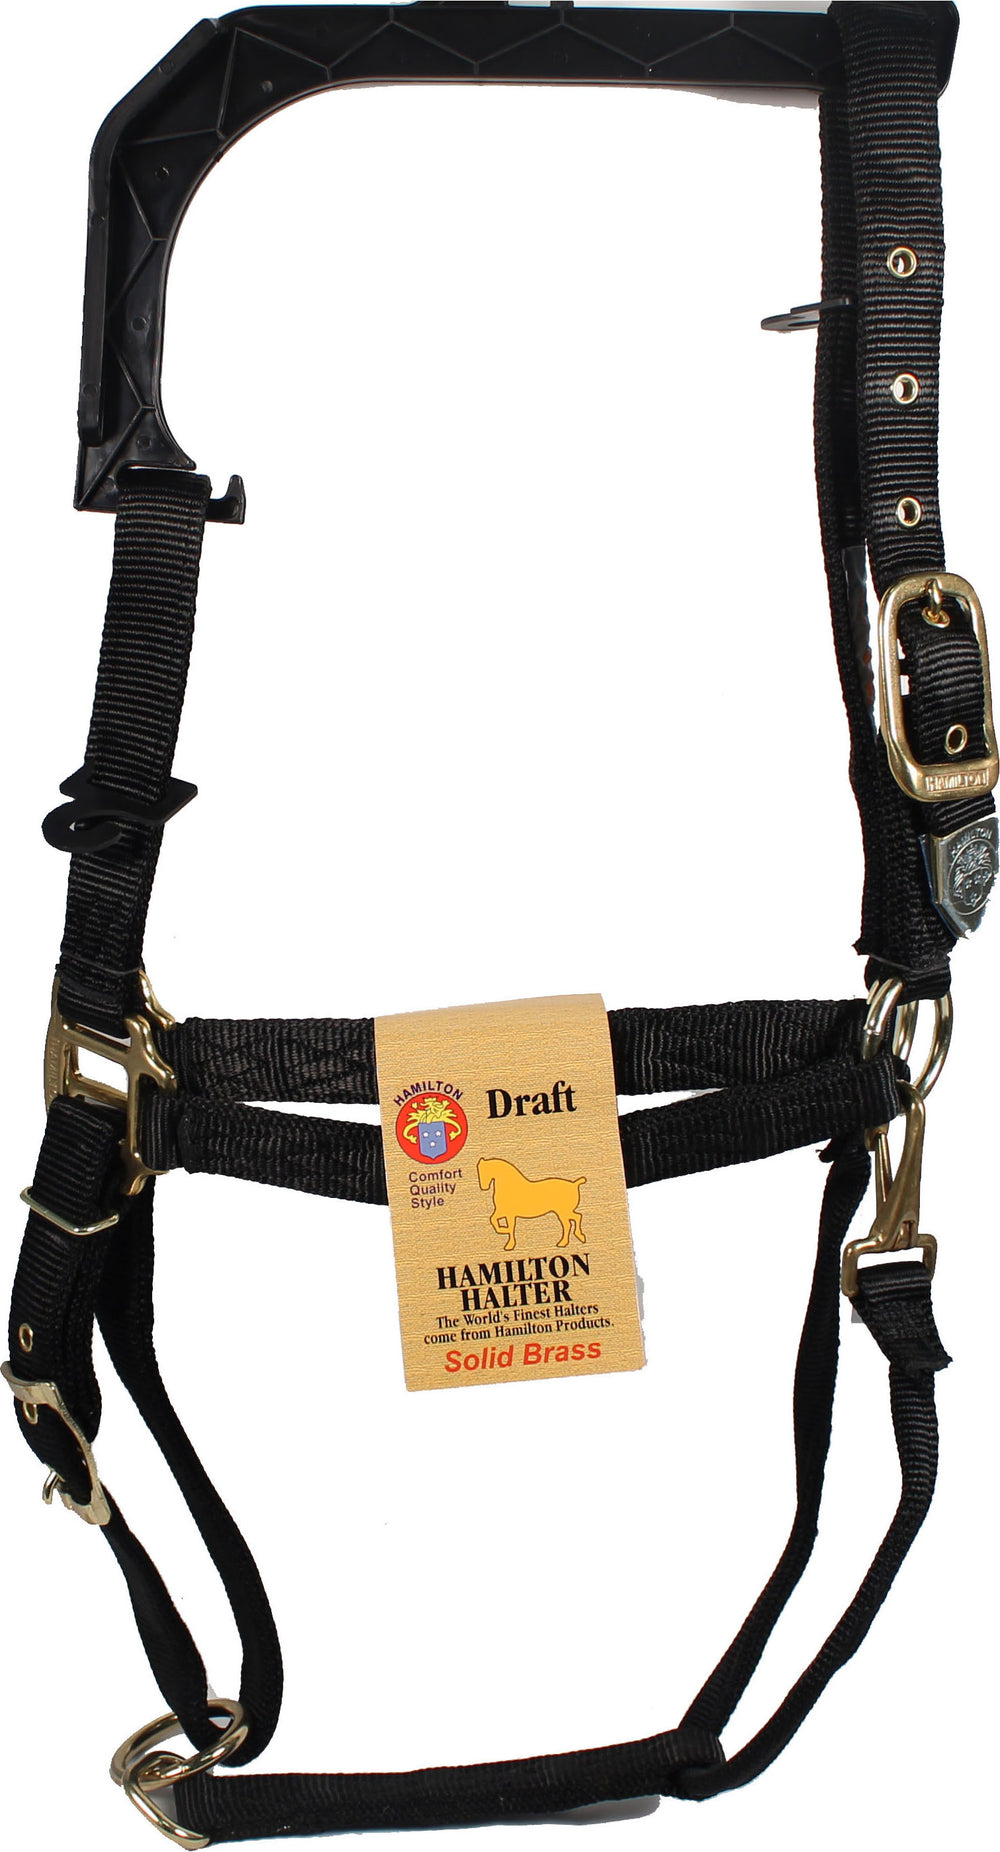 Hamilton Halter Company-Adjustable Chin Horse Halter With Snap- Red Yearling